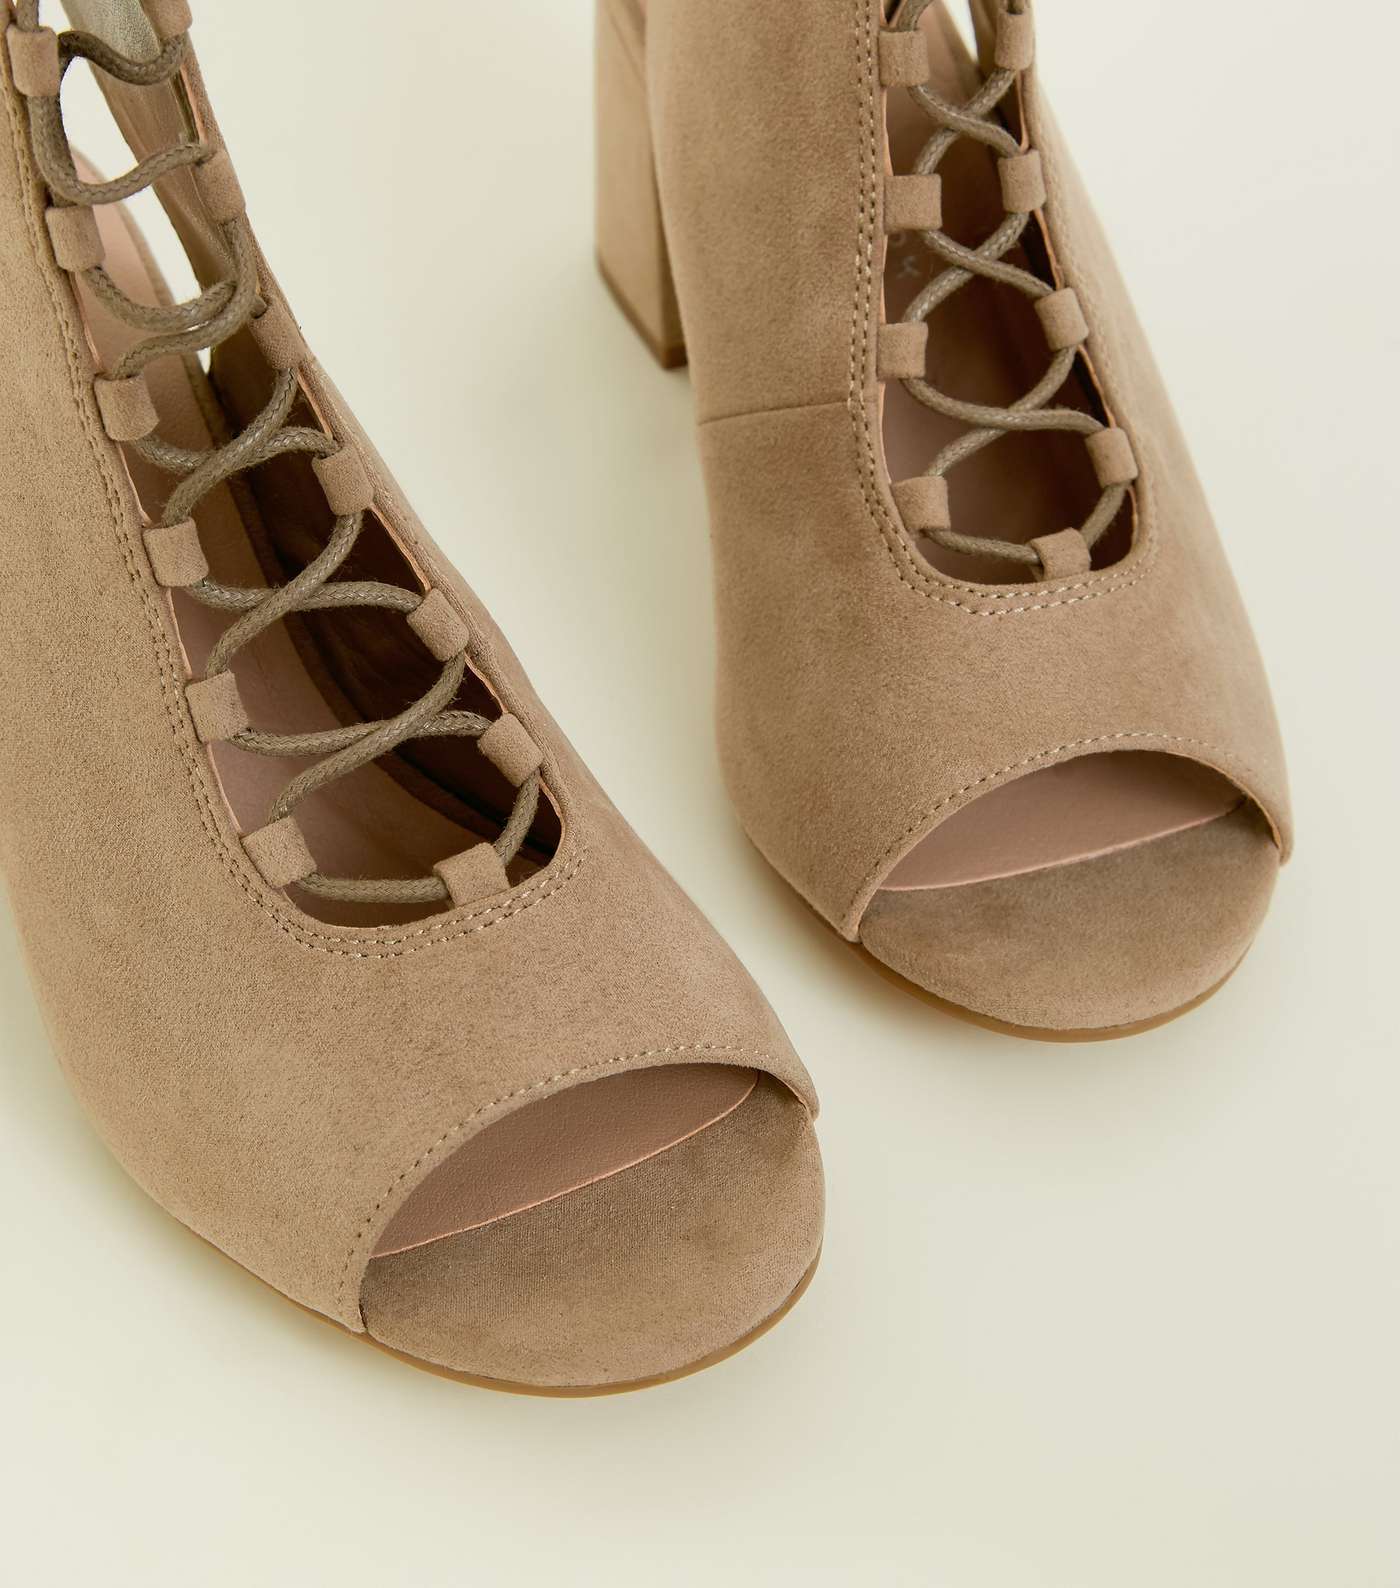 Girls Light Brown Suedette Lace Up Peep Toe Boots Image 3